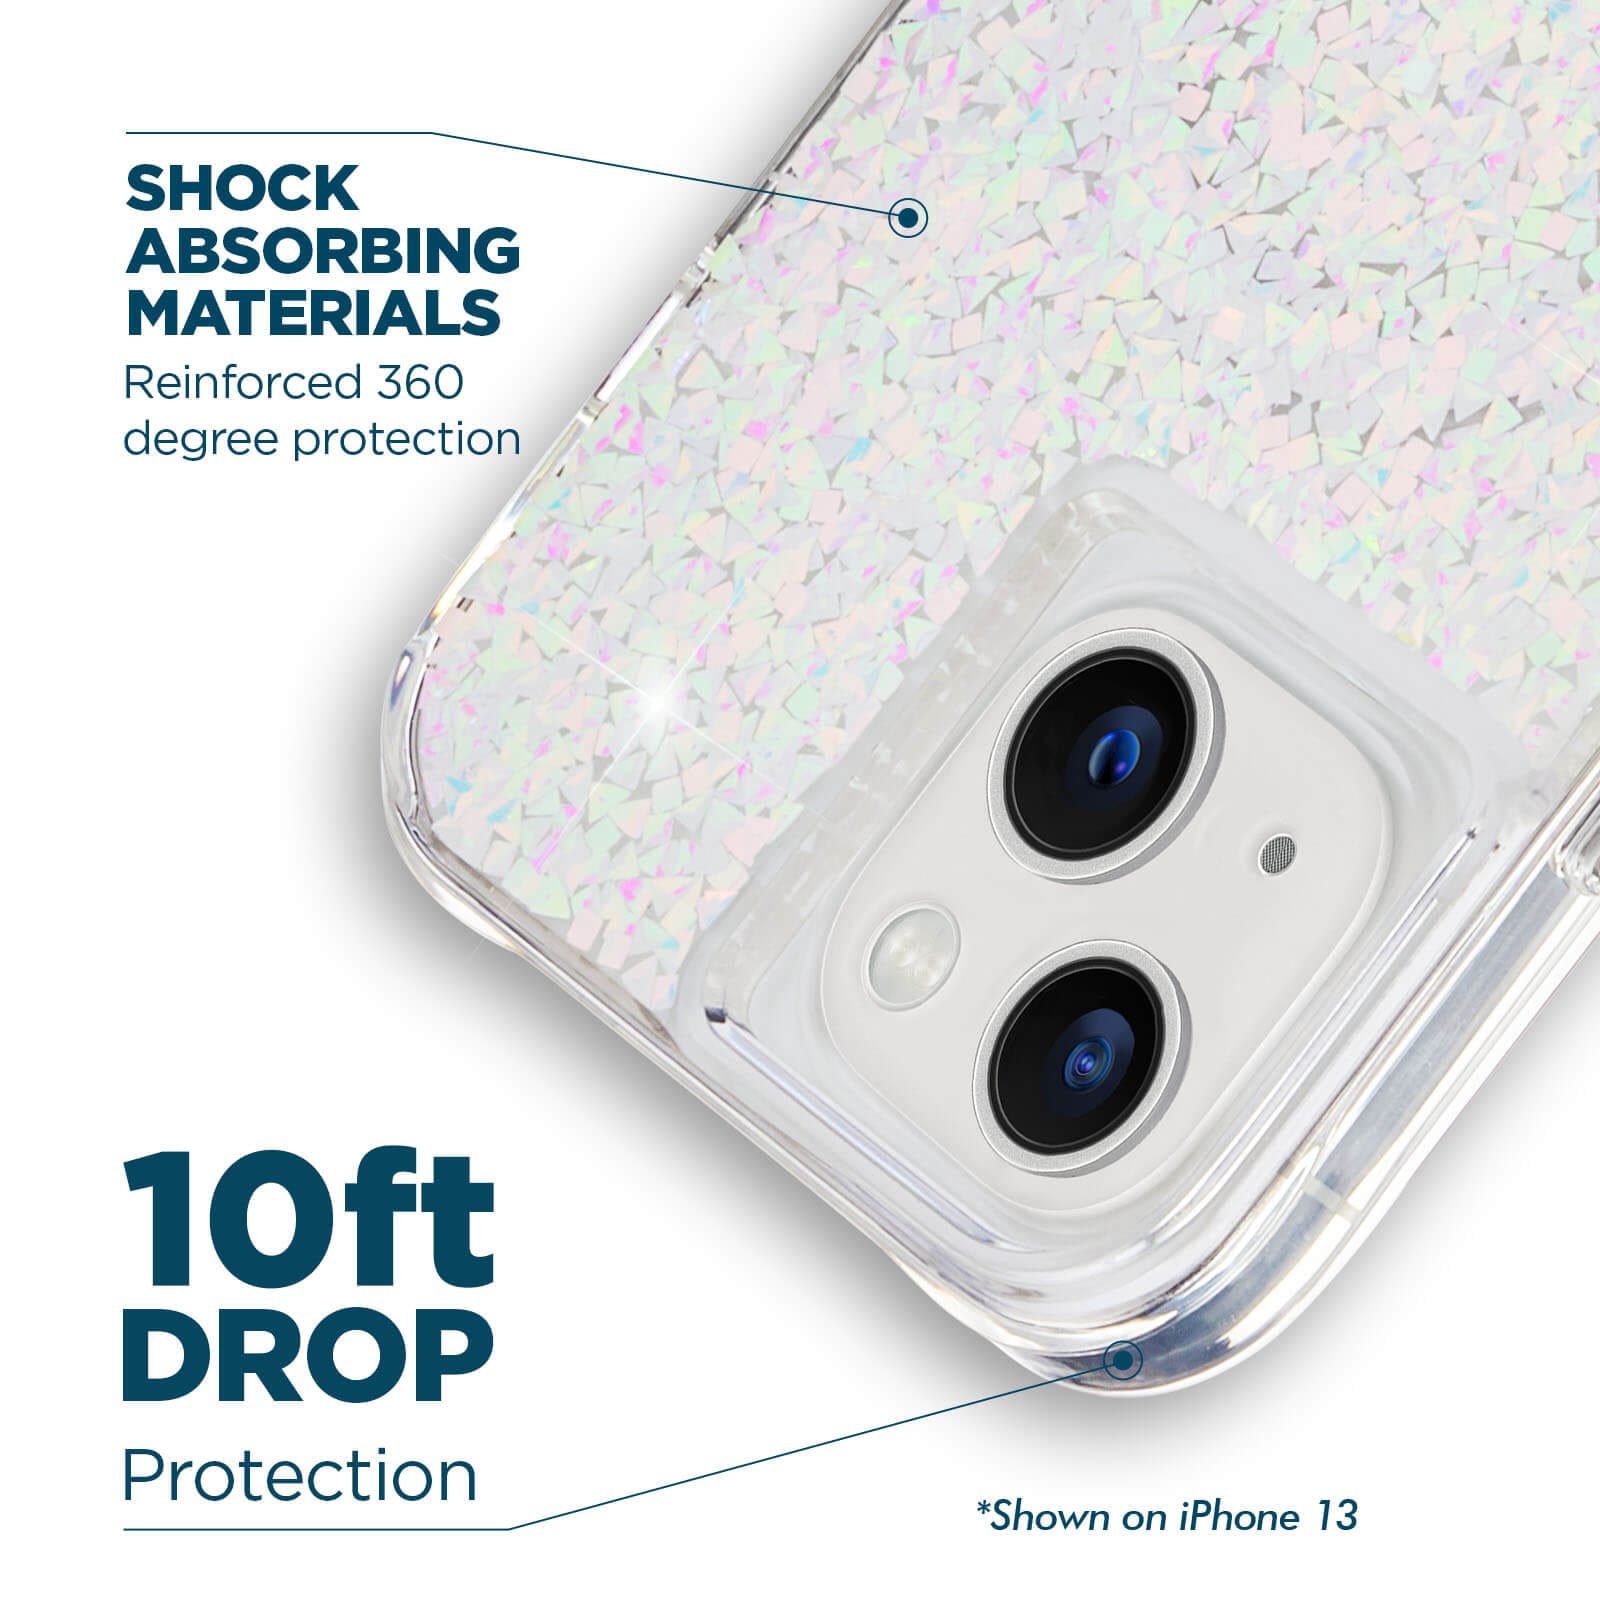 Shock absorbing materials reinforced 360 degree protection. 10ft drop protection. *shown on iPhone 13. color::Twinkle Diamond